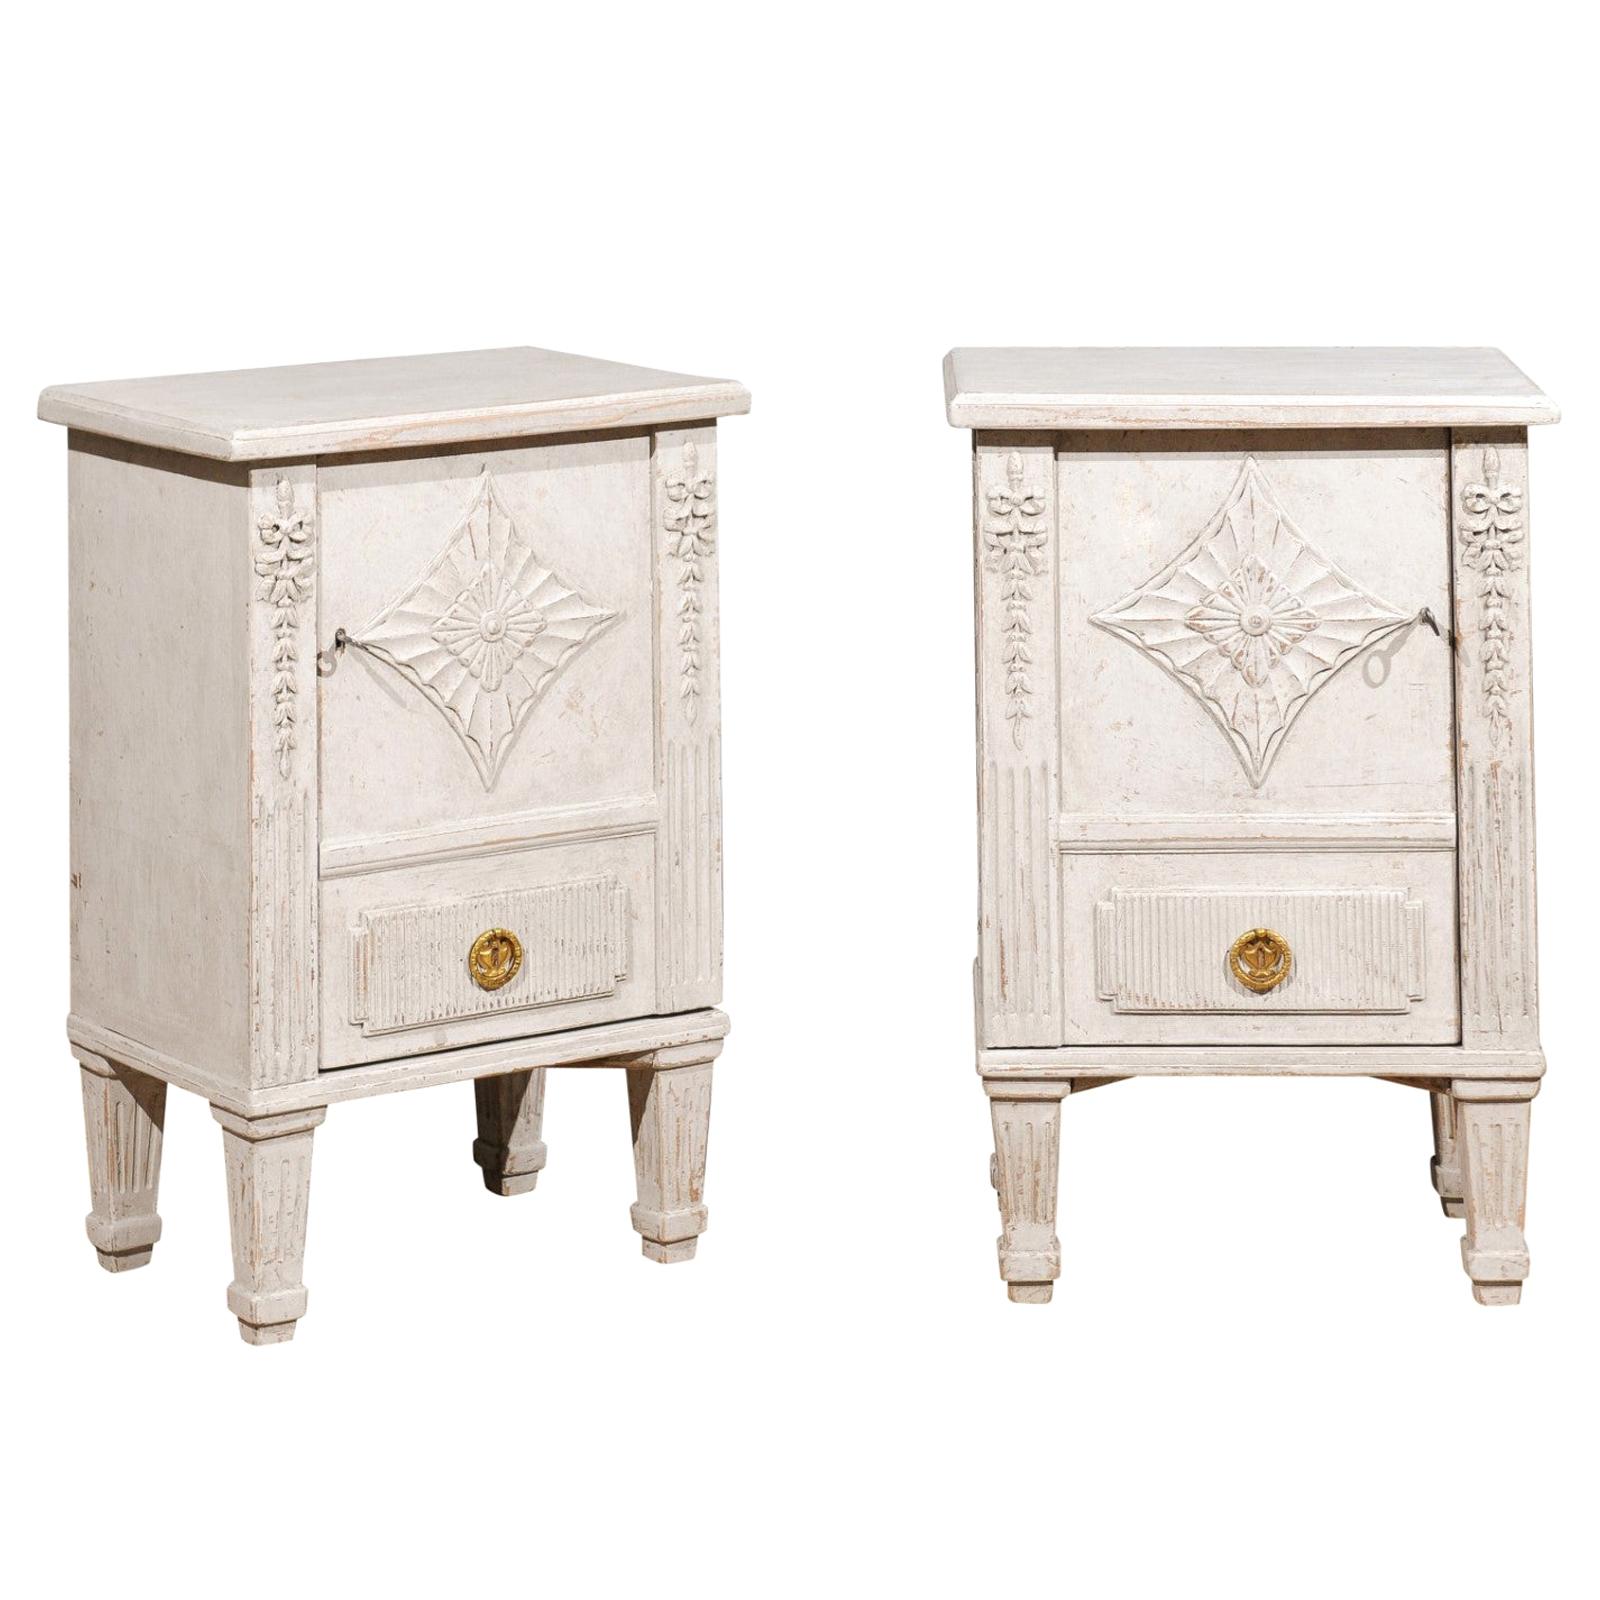 Pair of Swedish Neoclassical Style Painted Nightstand Cabinets with Single Door